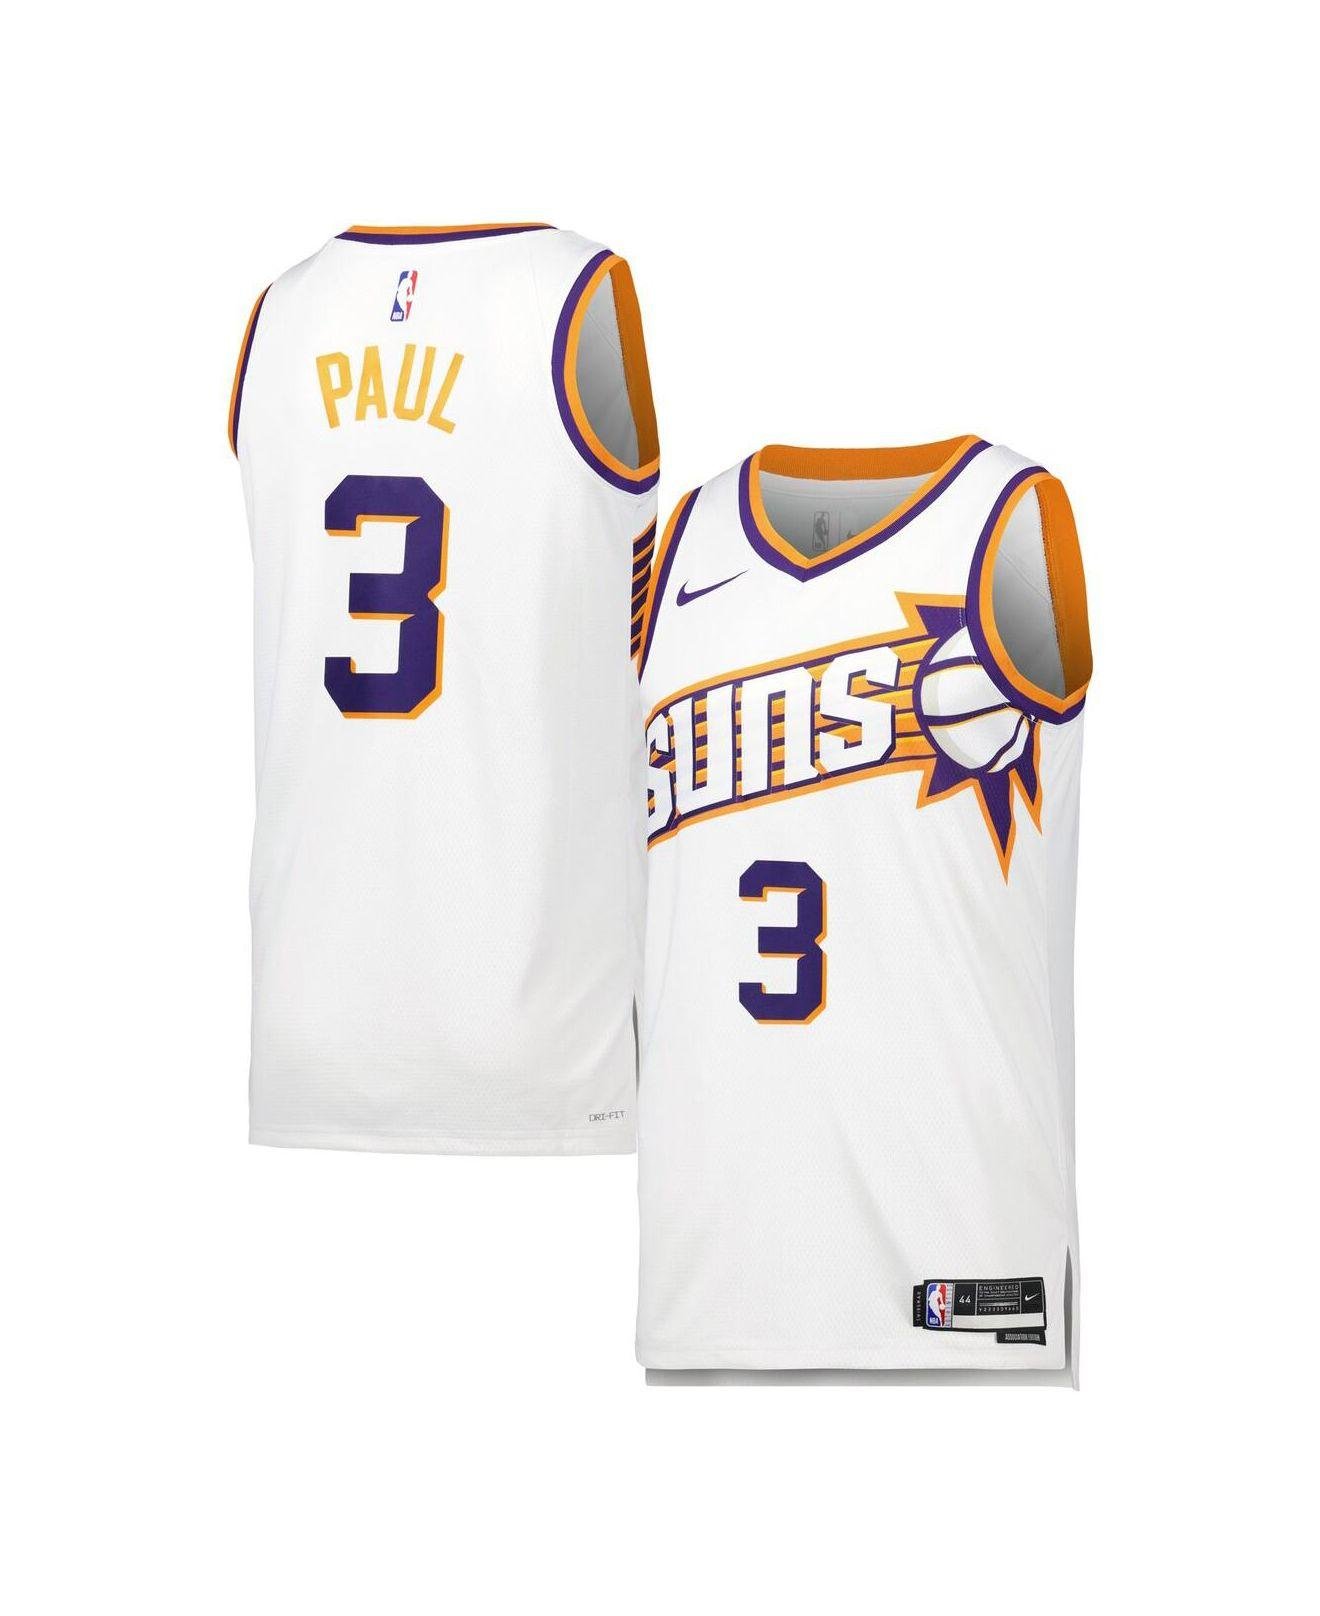 Nike And Kevin Durant Phoenix Suns 2022/23 Swingman Jersey in Blue